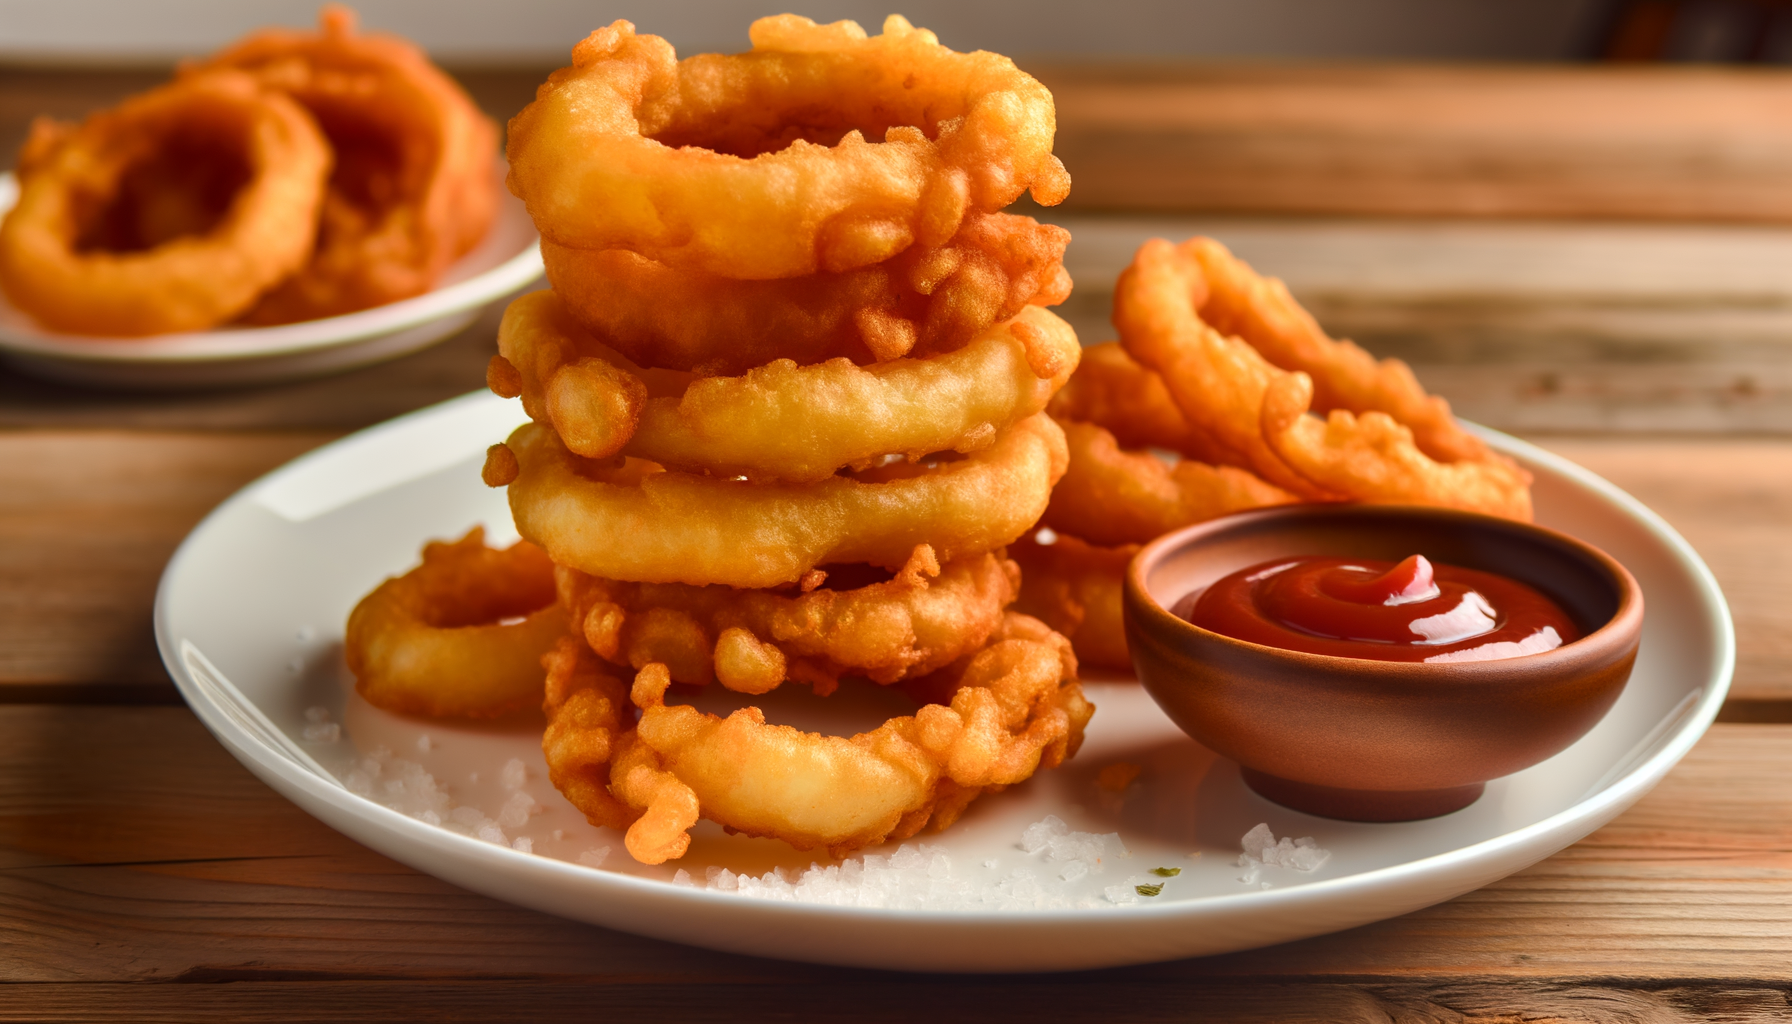 A tantalizing plate of perfectly crispy fried onion rings accompanied by homemade ketchup, set on a rustic wood table.